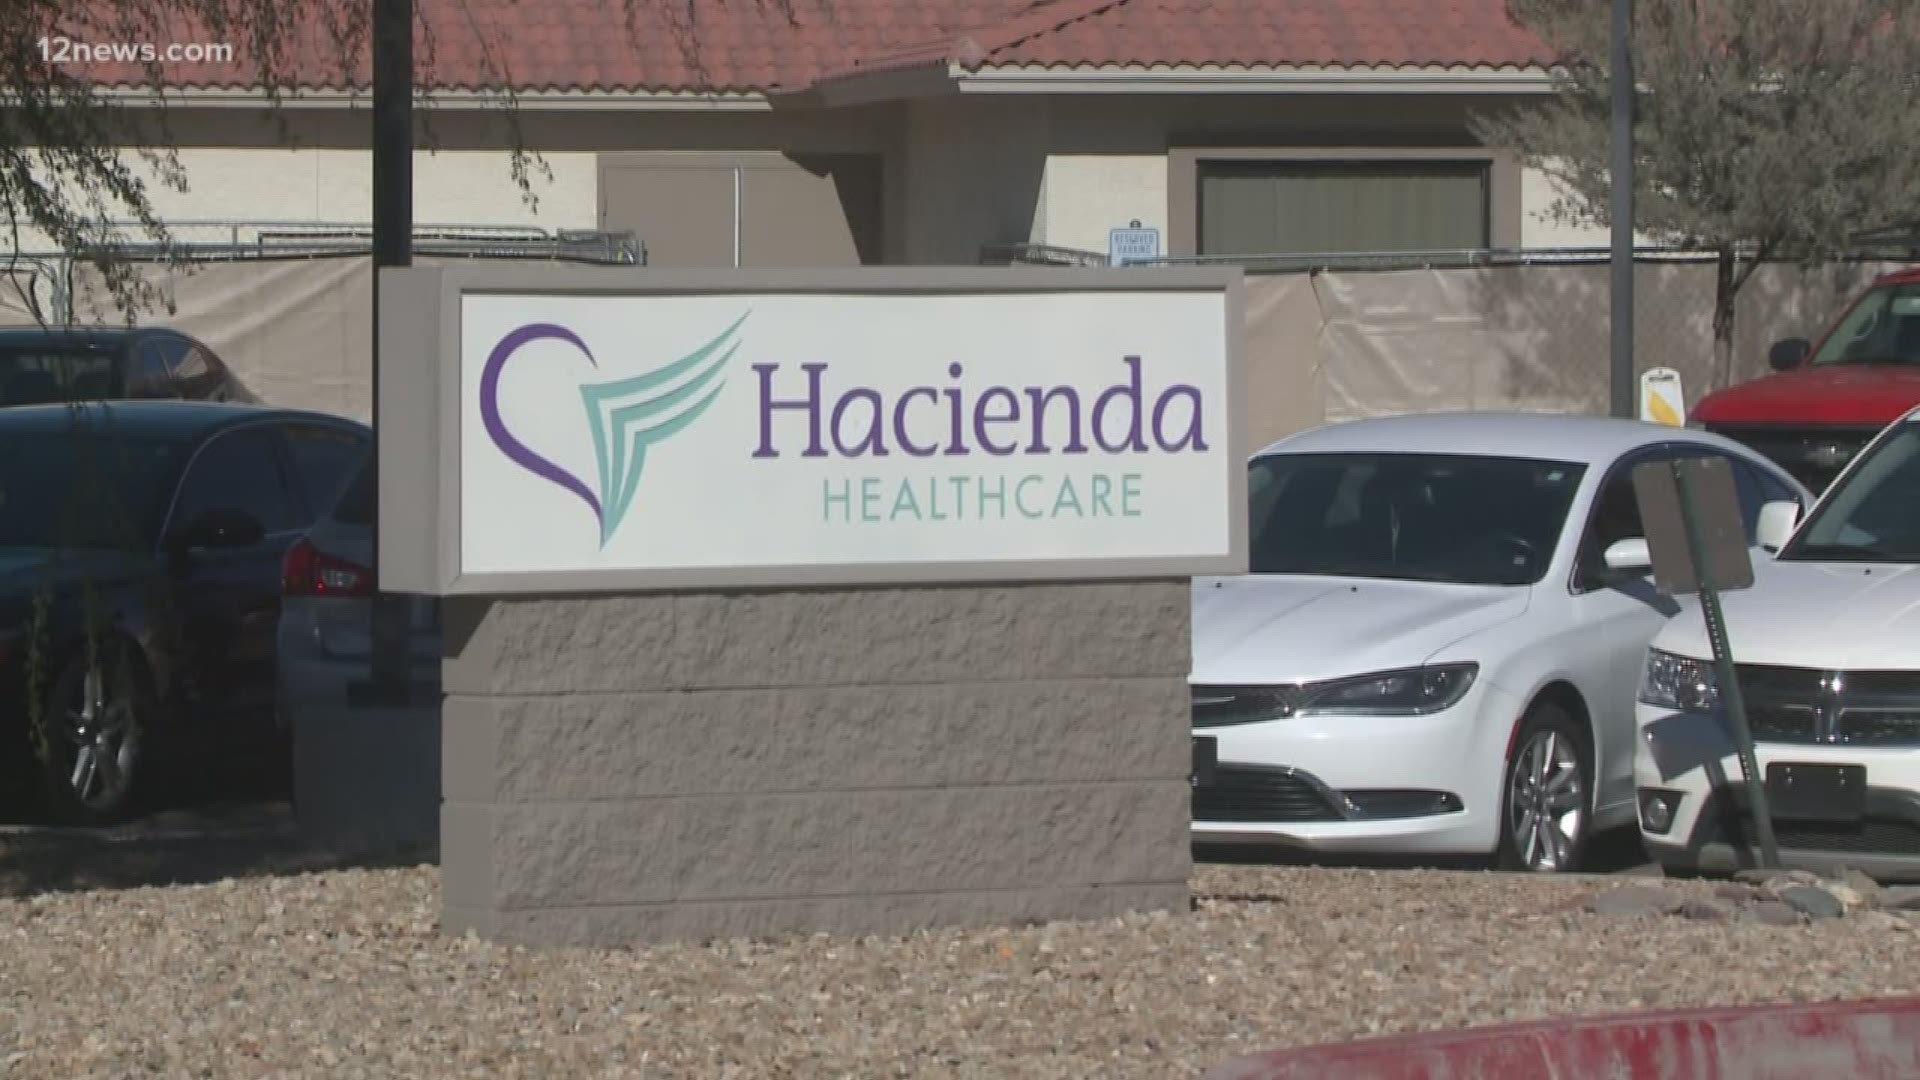 There are lots of questions surrounding the controversy surrounding Hacienda Healthcare. We answer some of the most common questions.